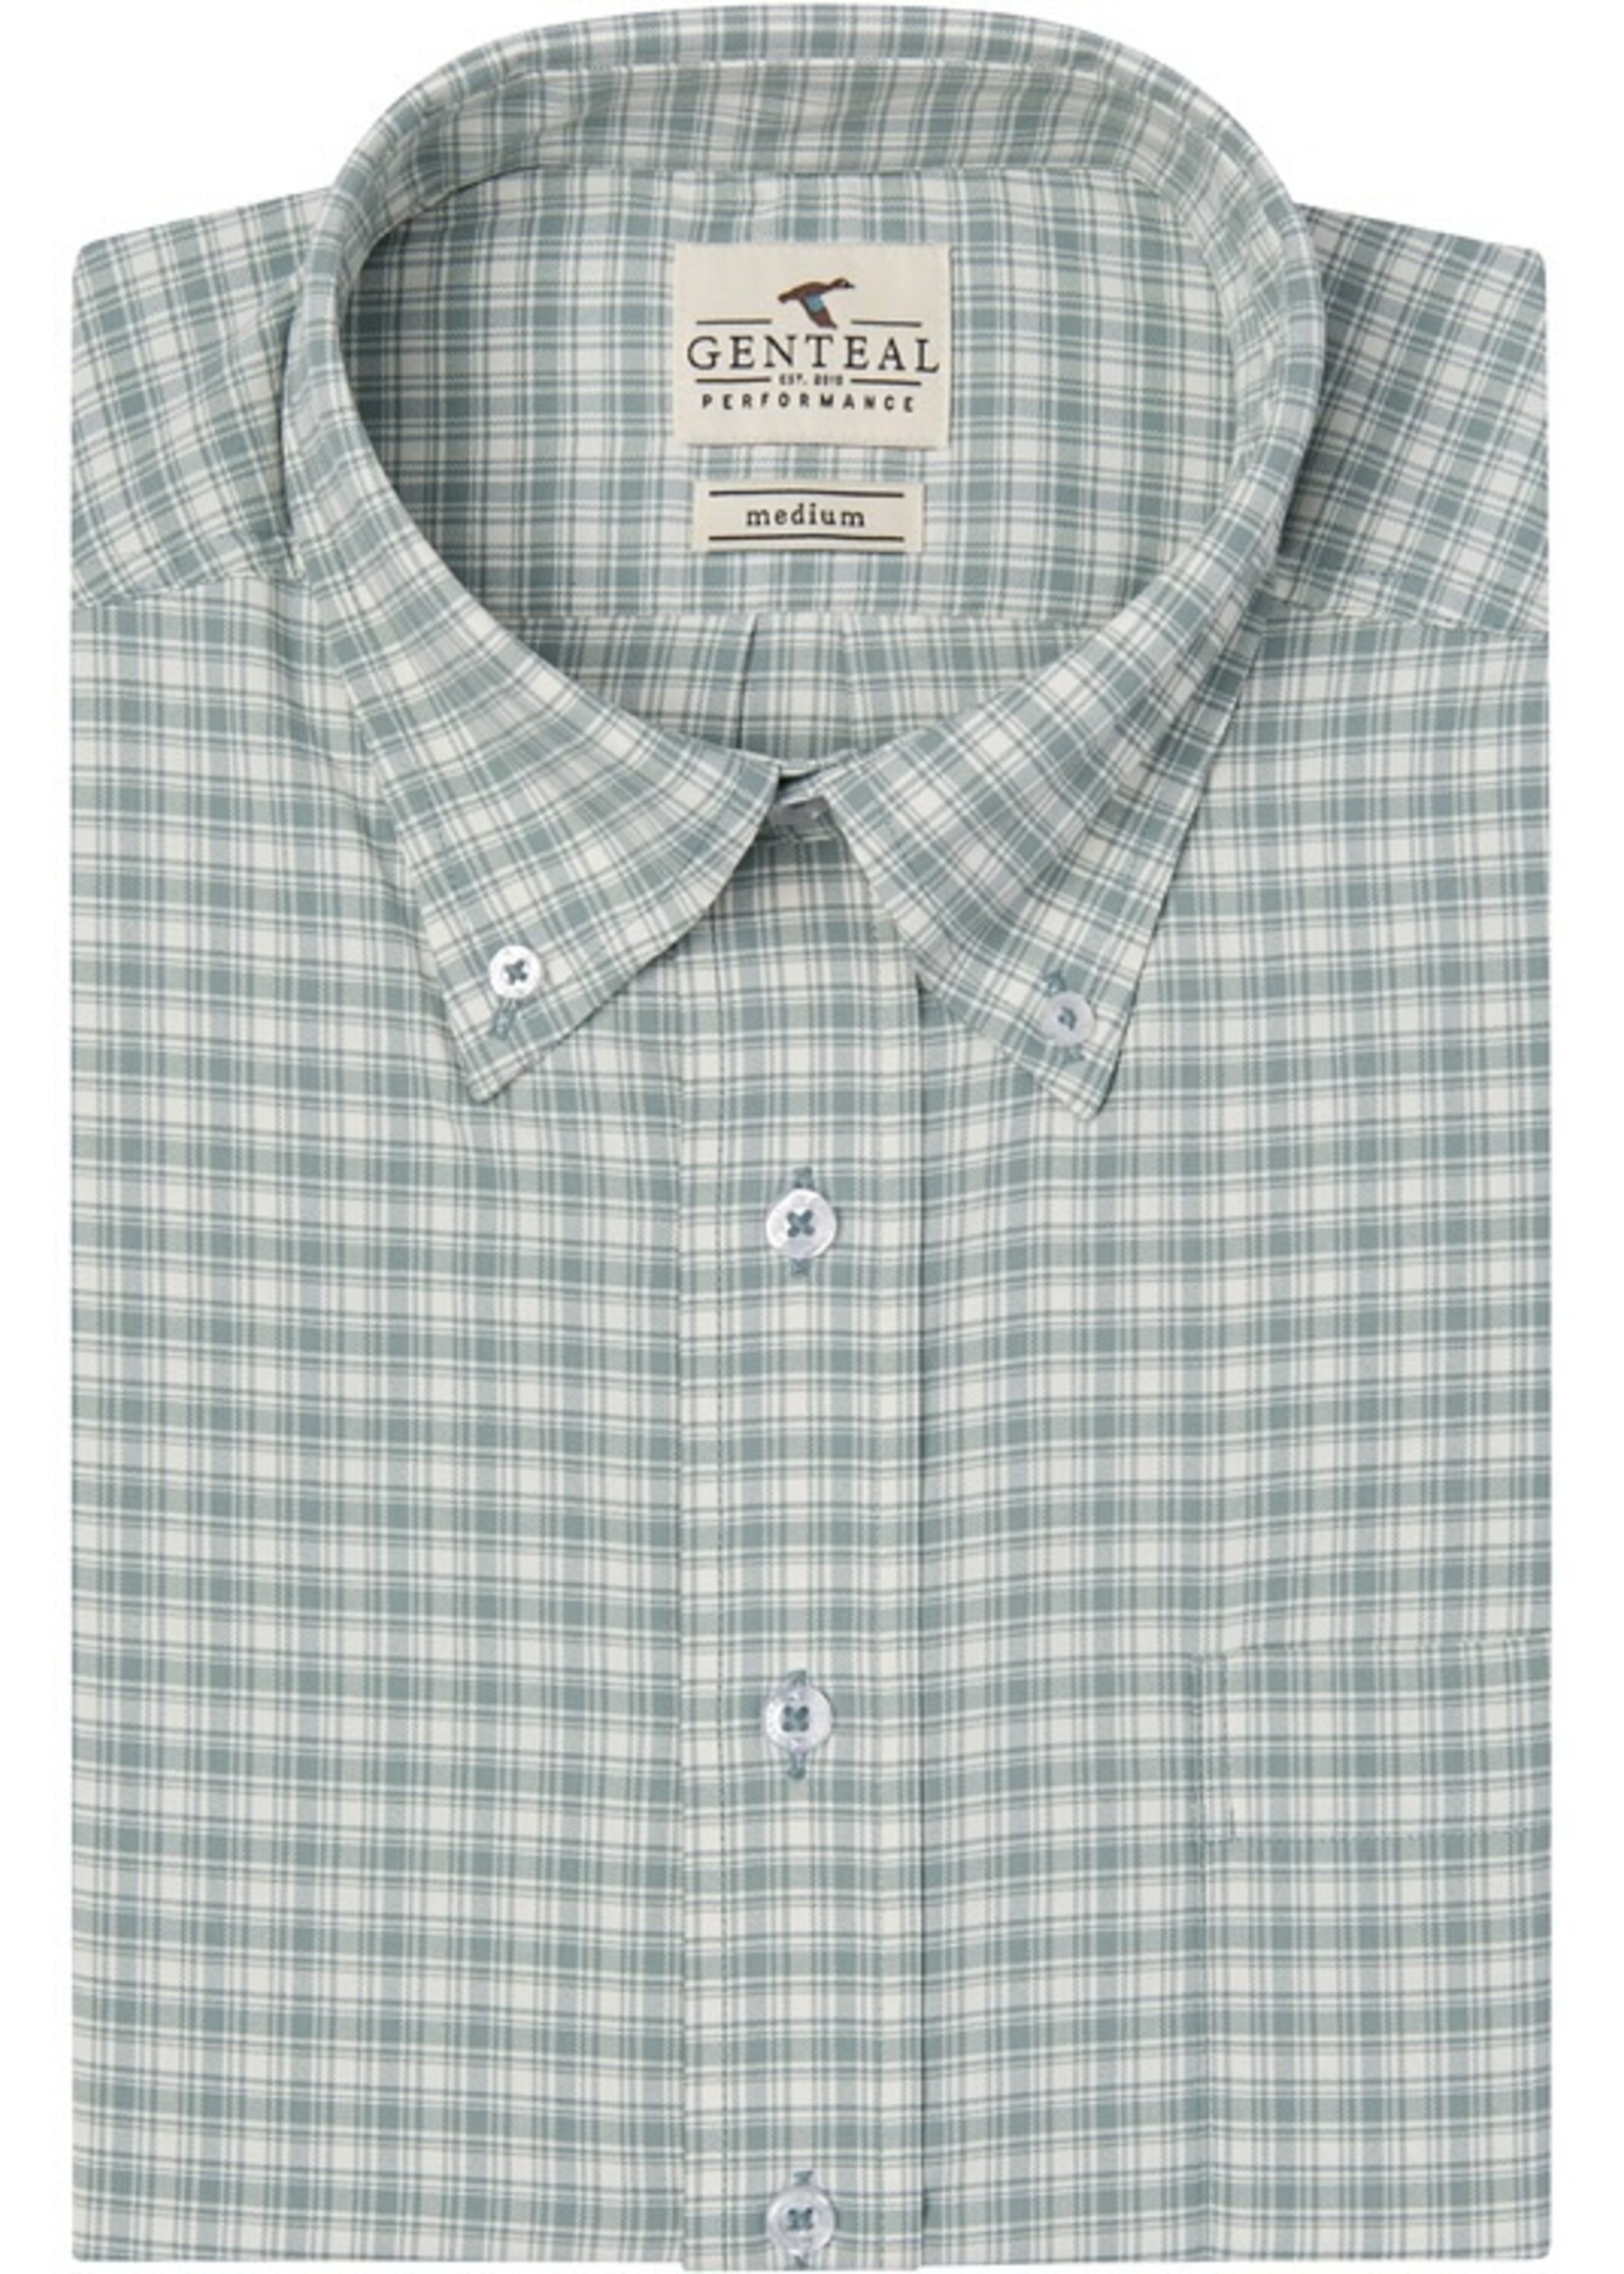 GenTeal Apparel Ashland Plaid Softouch Performance Woven